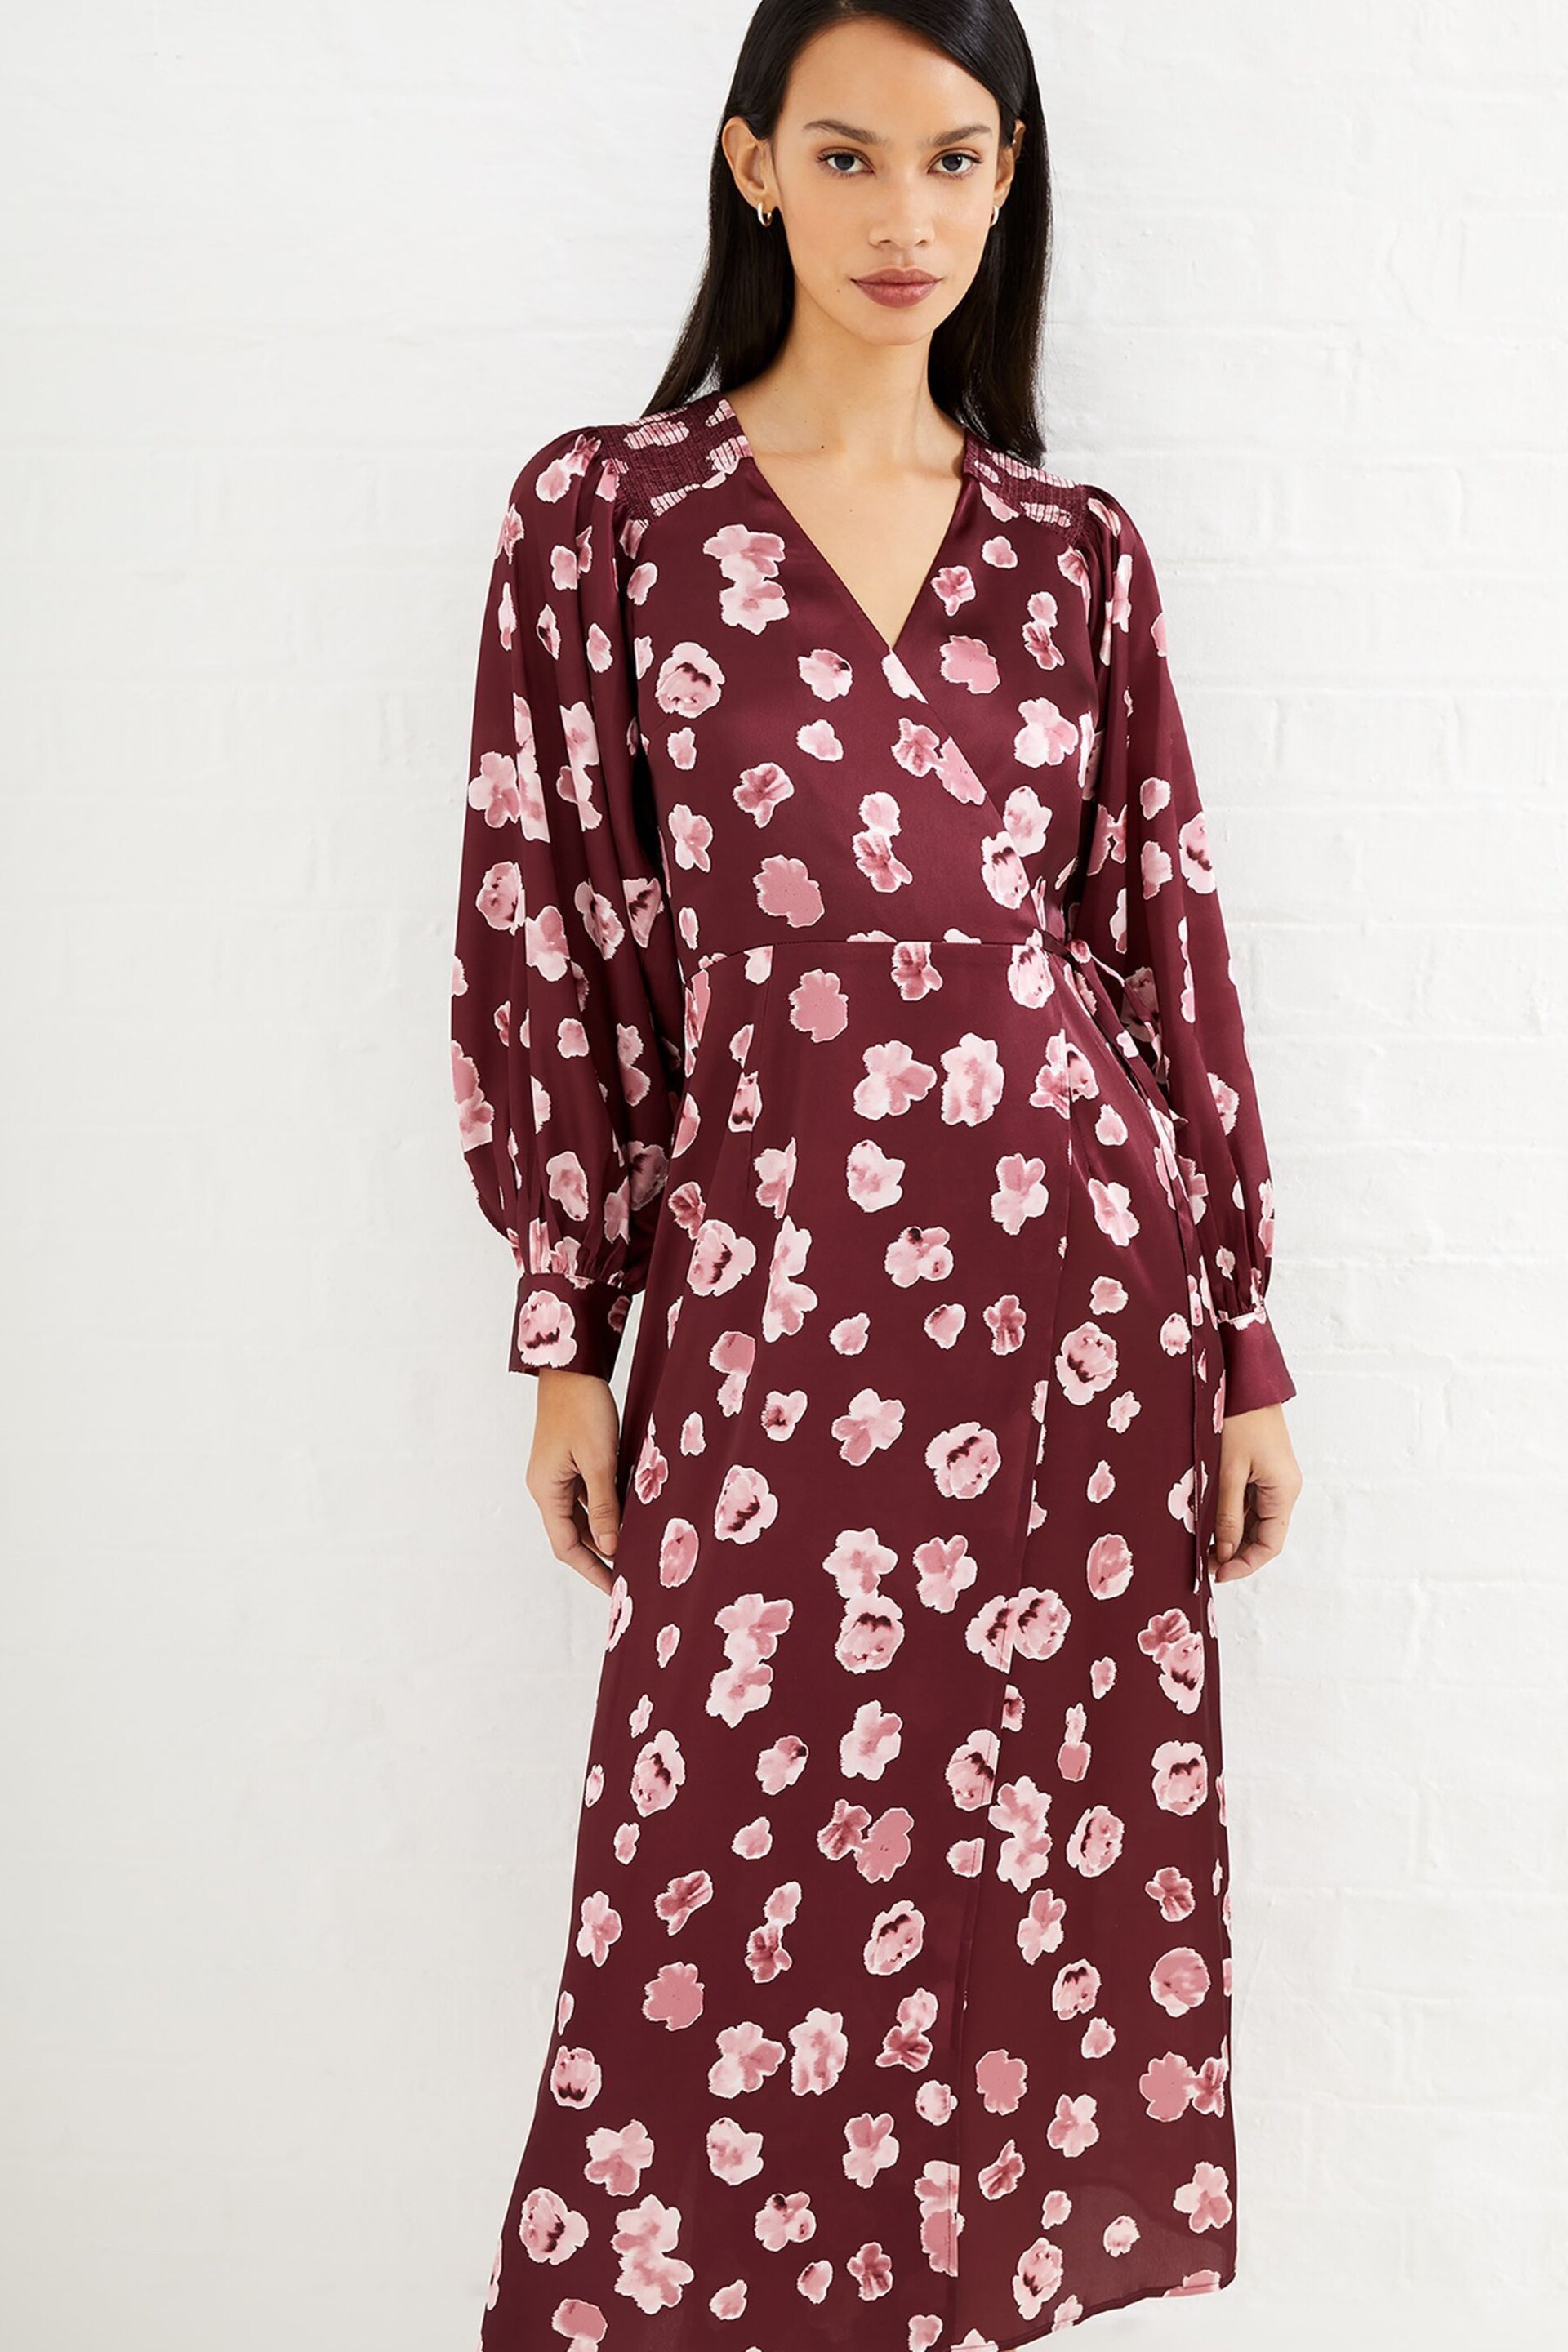 French Connection Satin Long Sleeve Dress - Image 1 of 4